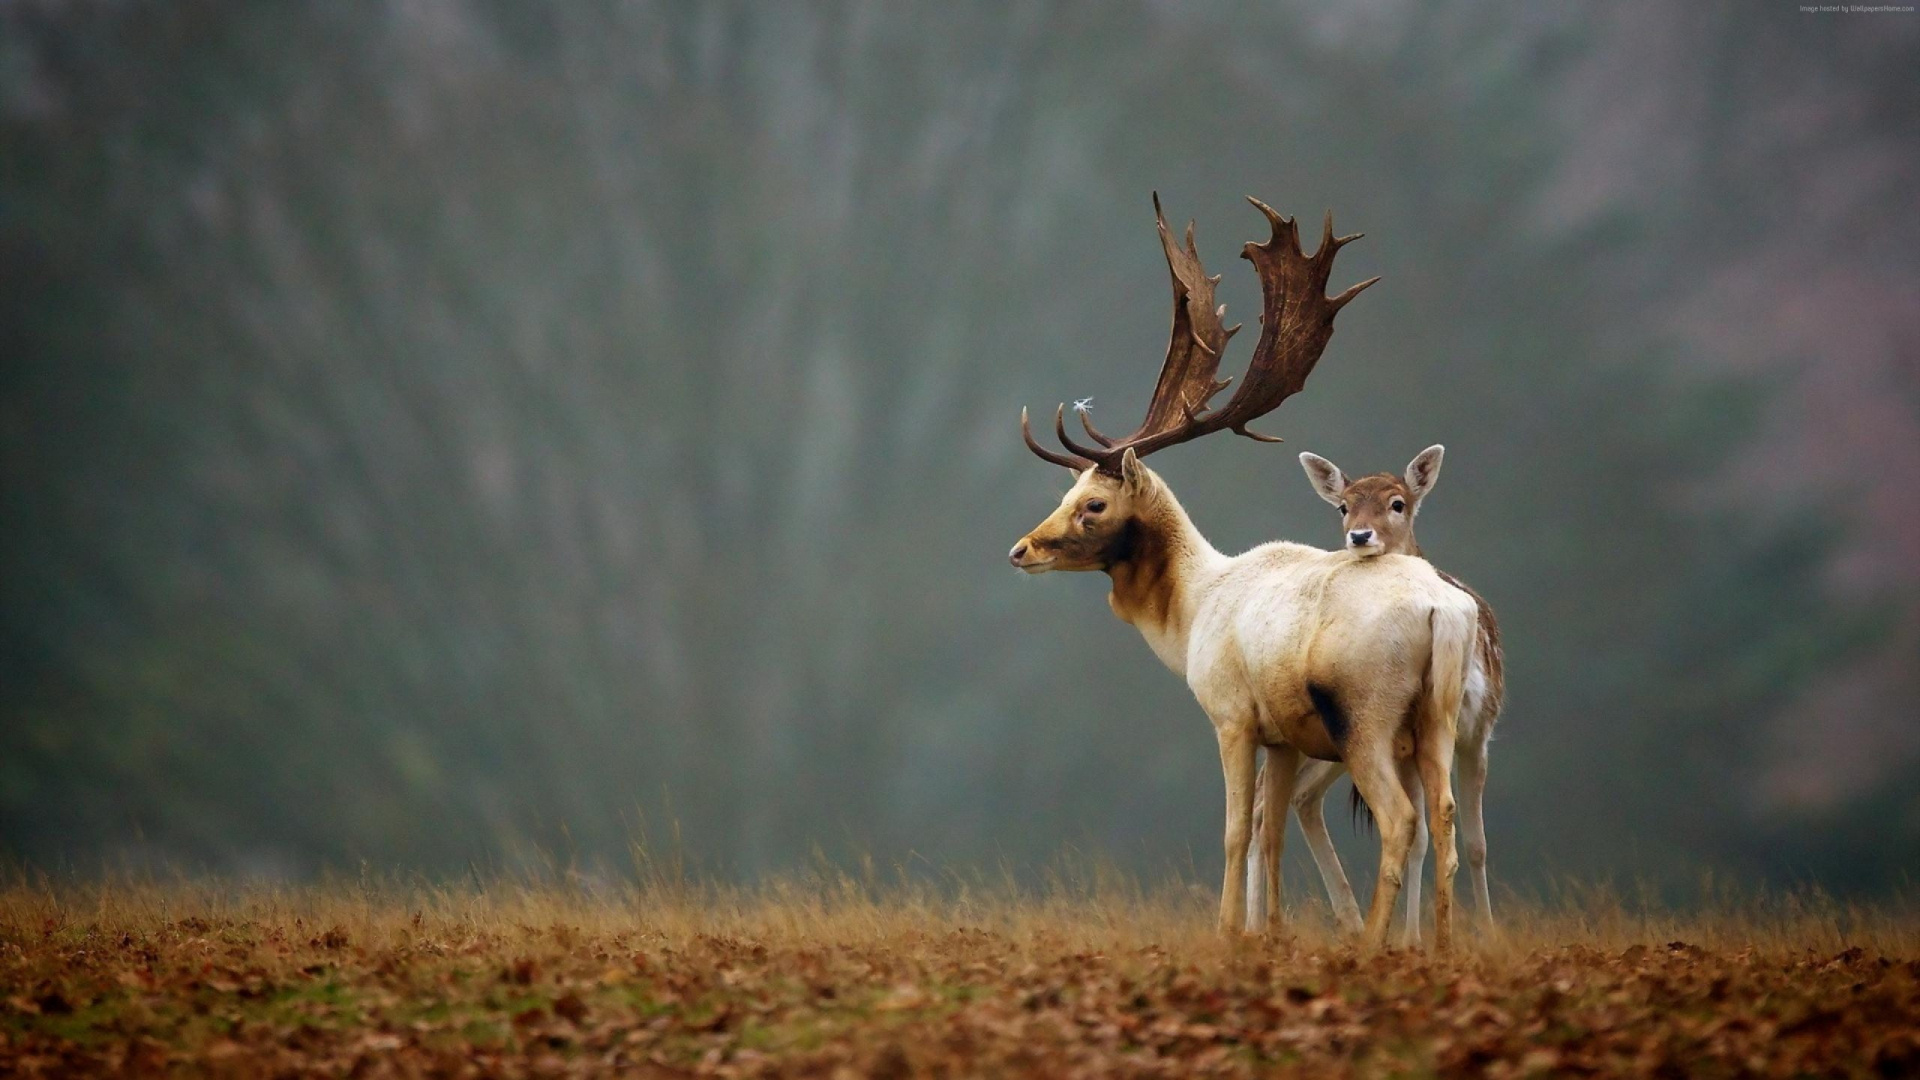 White and Brown Deer on Brown Grass Field. Wallpaper in 1920x1080 Resolution